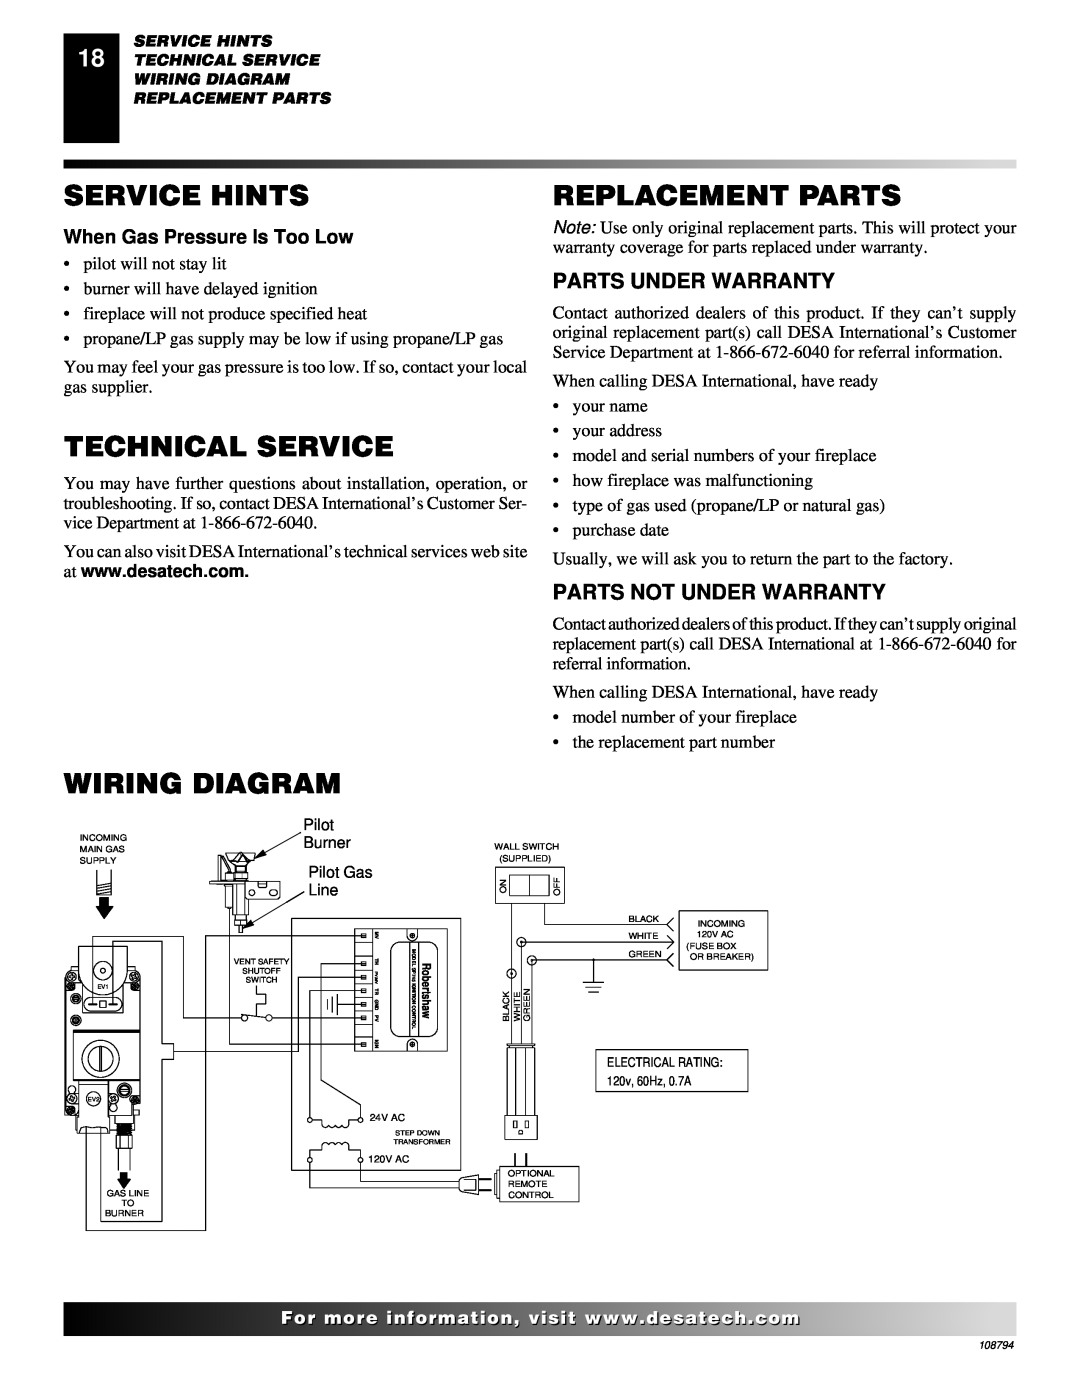 Desa P325E(B), VP325E(B) Service Hints, Technical Service, Replacement Parts, Wiring Diagram, When Gas Pressure Is Too Low 